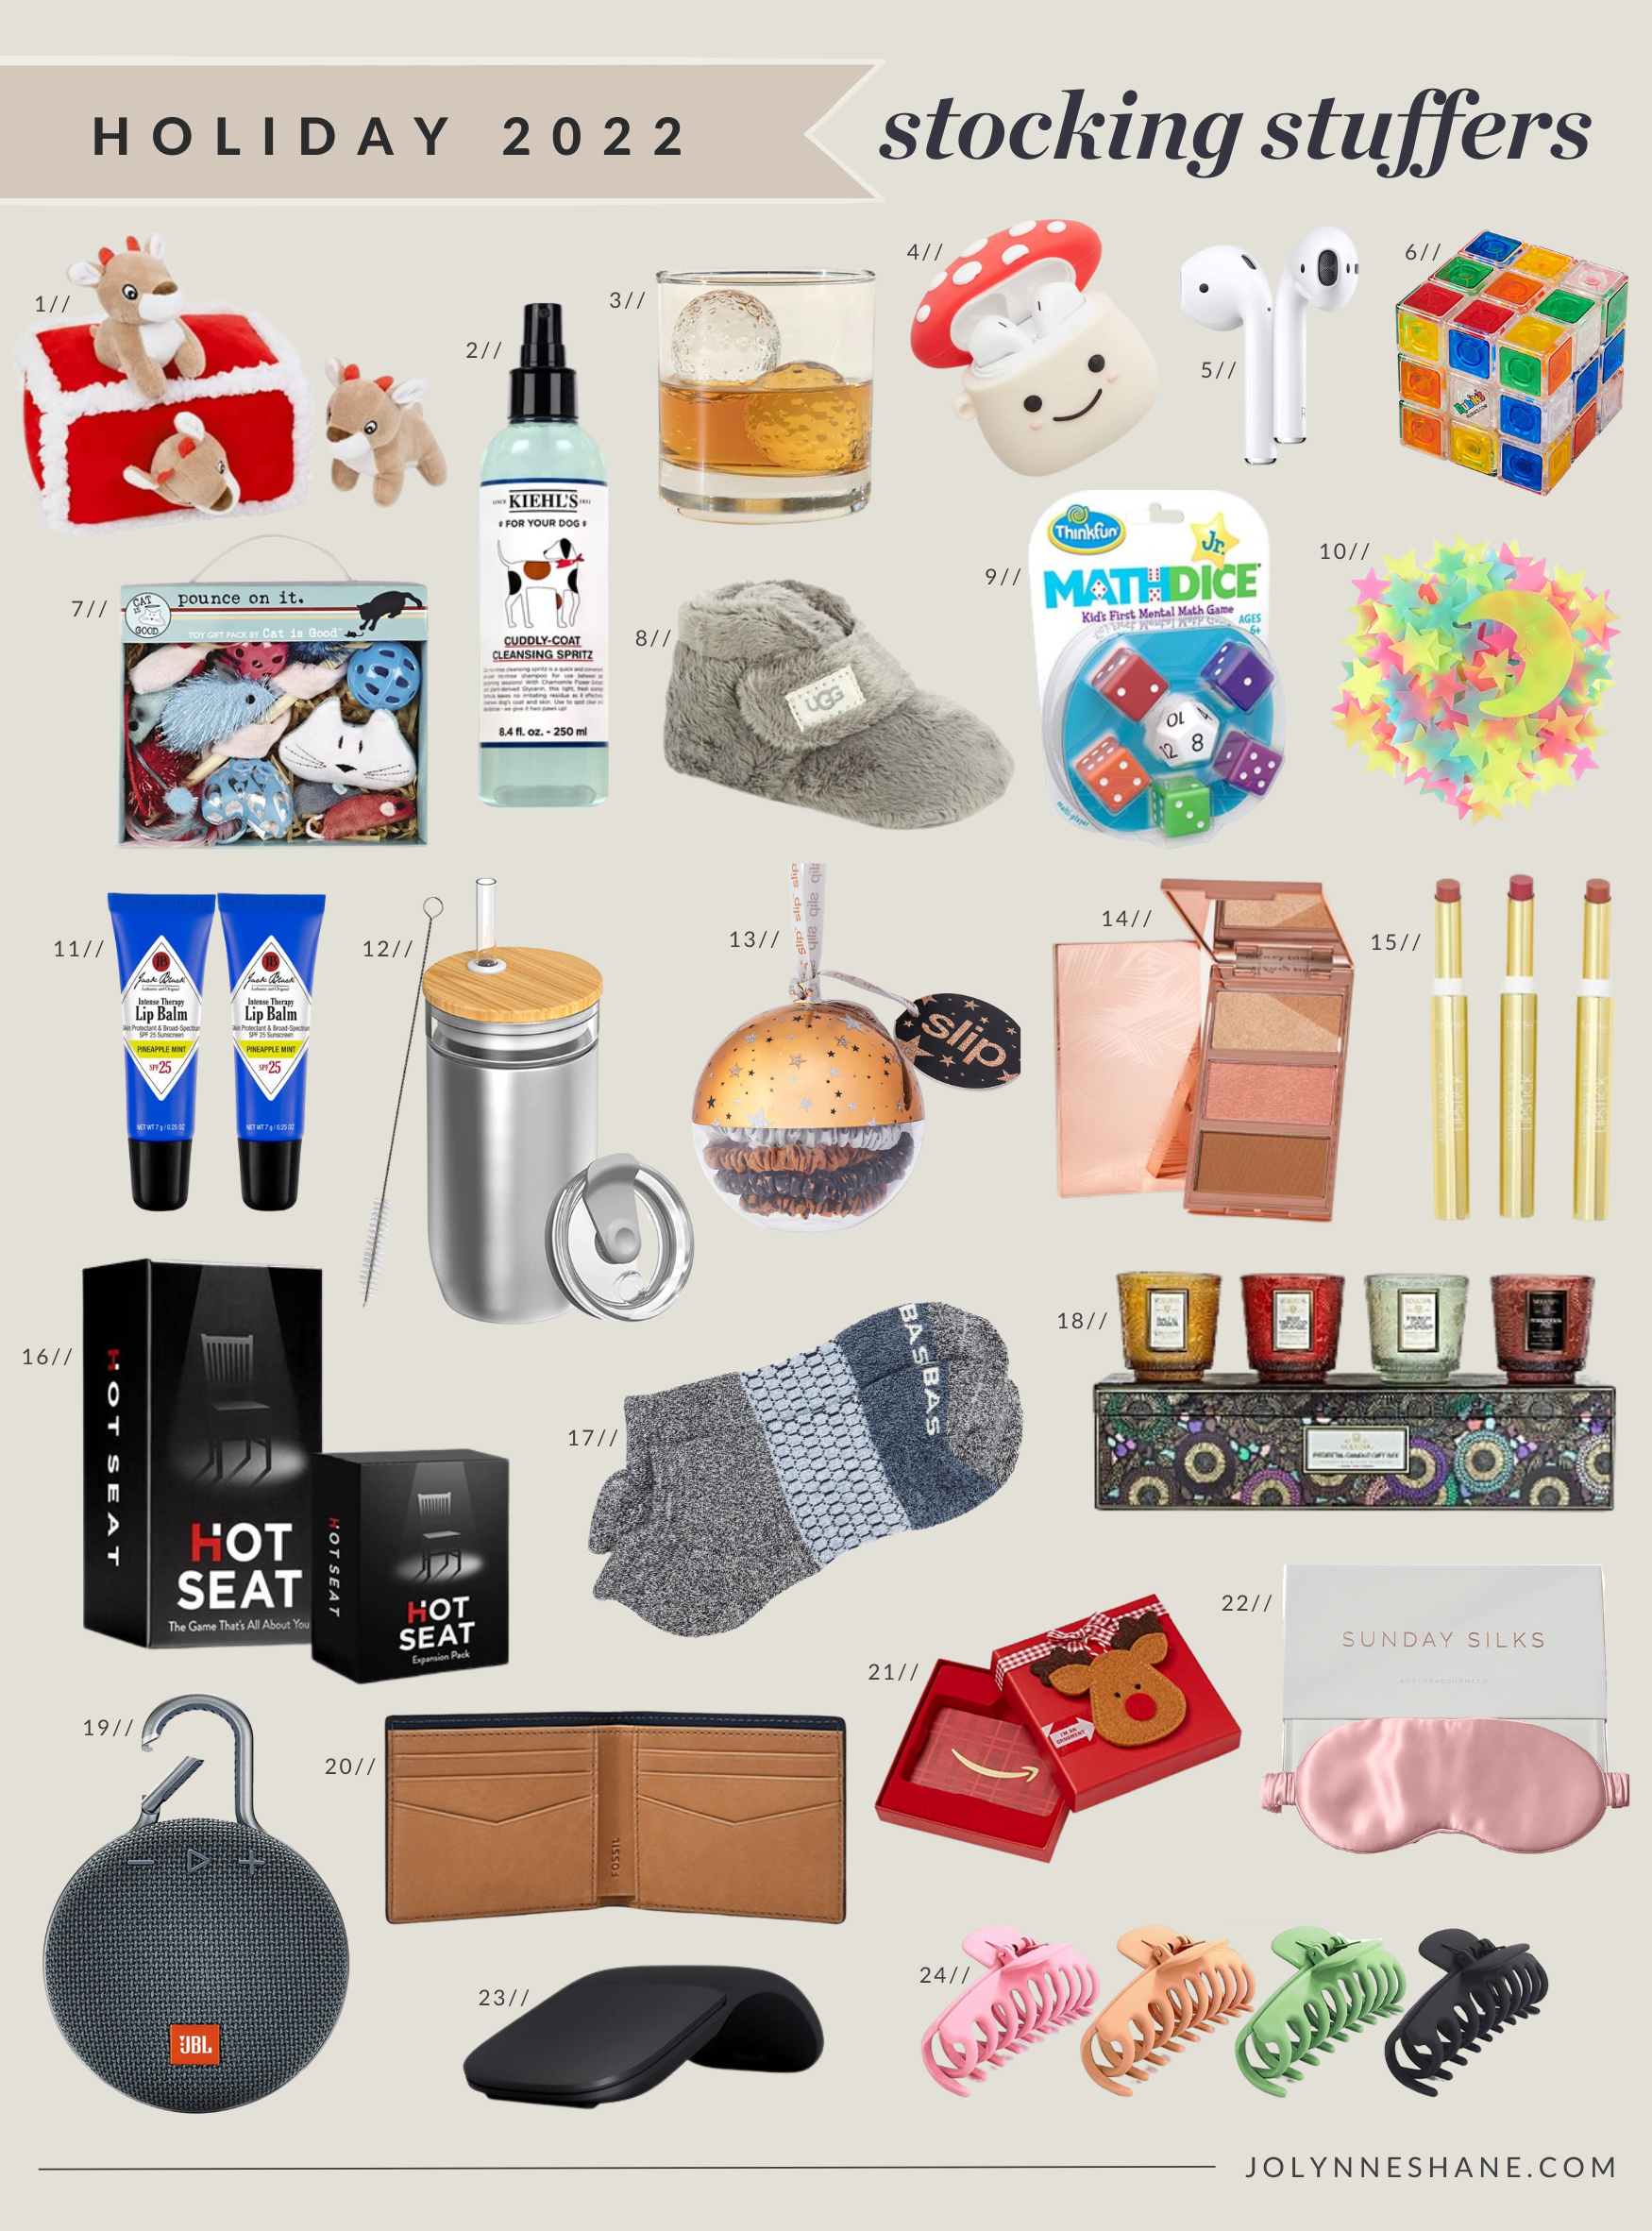 https://jolynneshane.com/wp-content/uploads/2022/12/2022-stocking-stuffer-gift-guide-featured.png